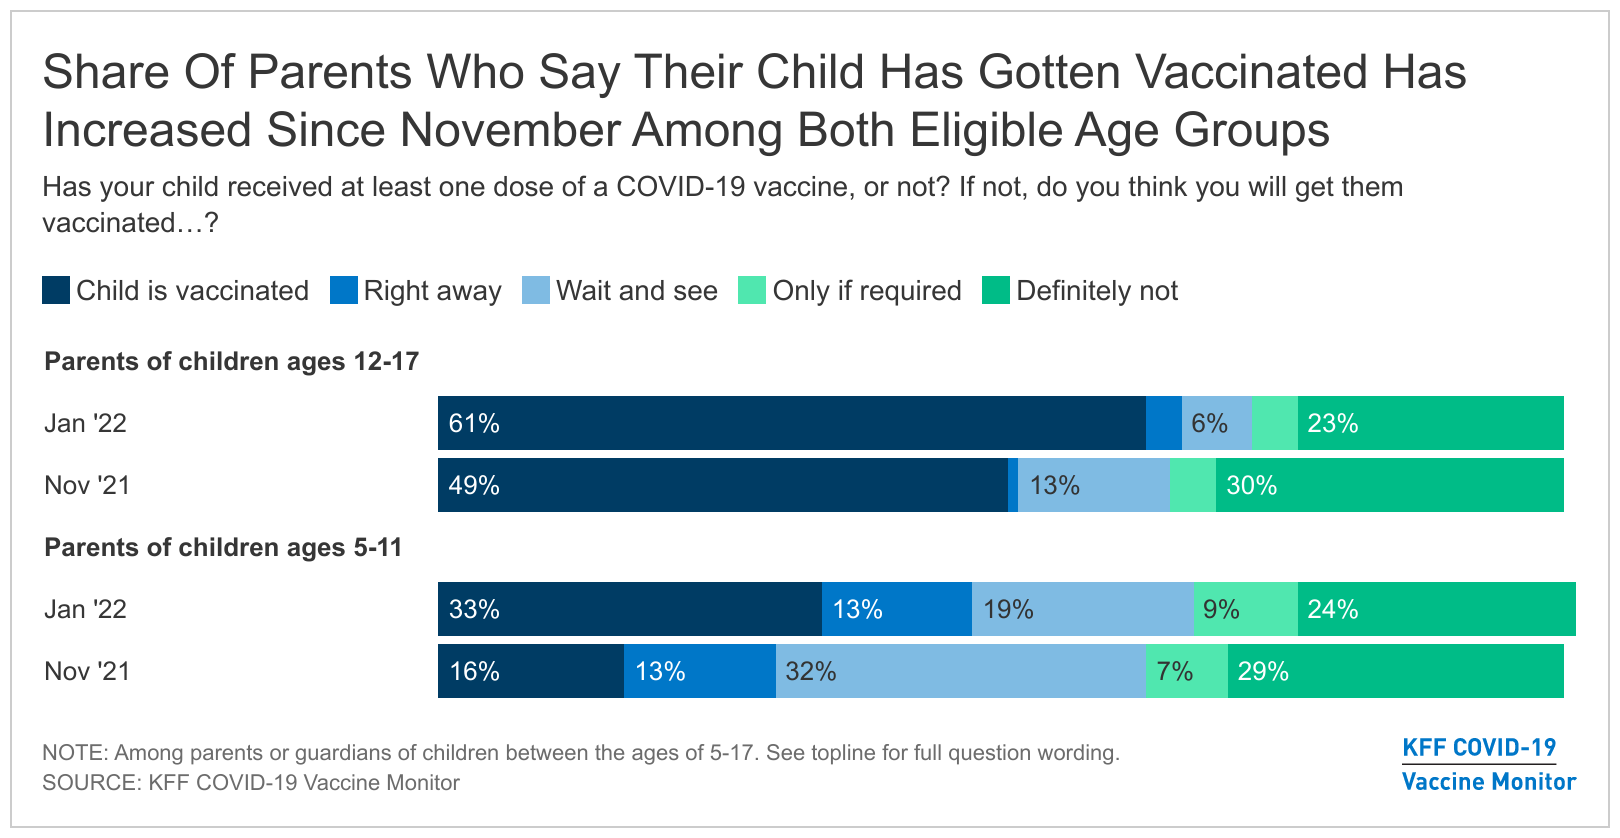 share-of-parents-who-say-their-child-has-gotten-vaccinated-has-increased-since-november-among-both-eligible-age-groups-1.png (1620×838)